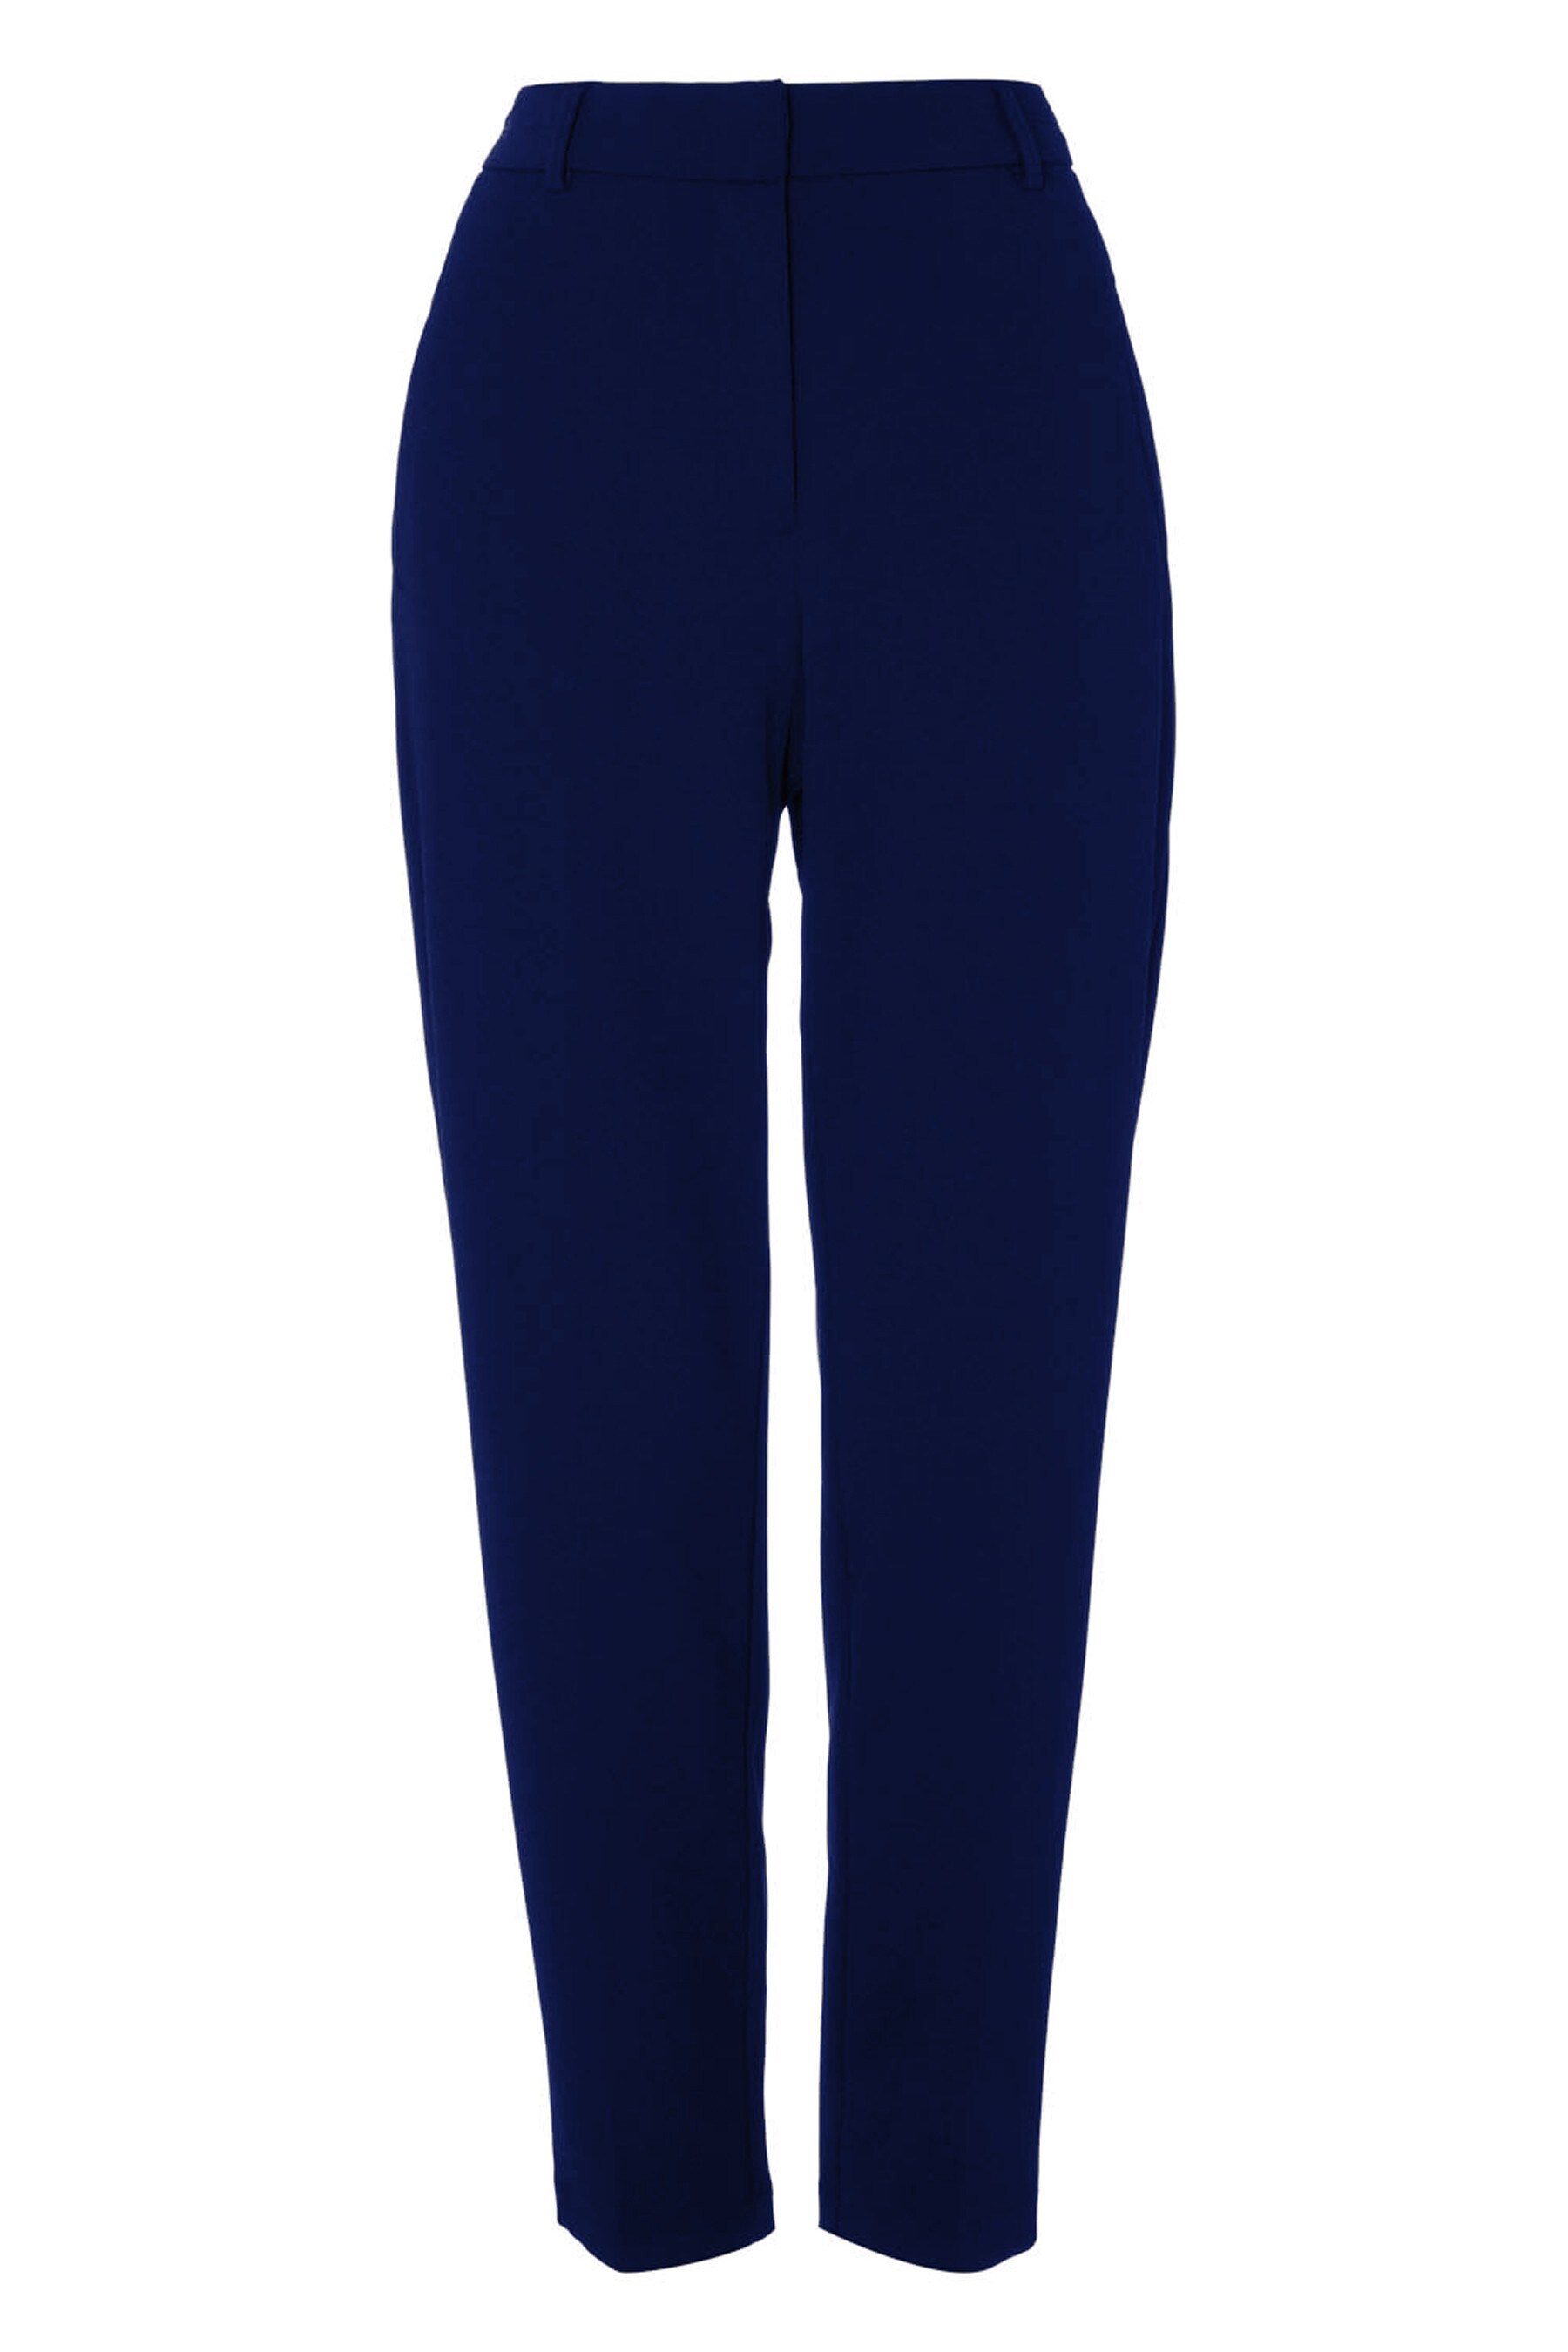 Buy Roman Navy Petite Originals Straight Leg Tapered Trouser from the ...